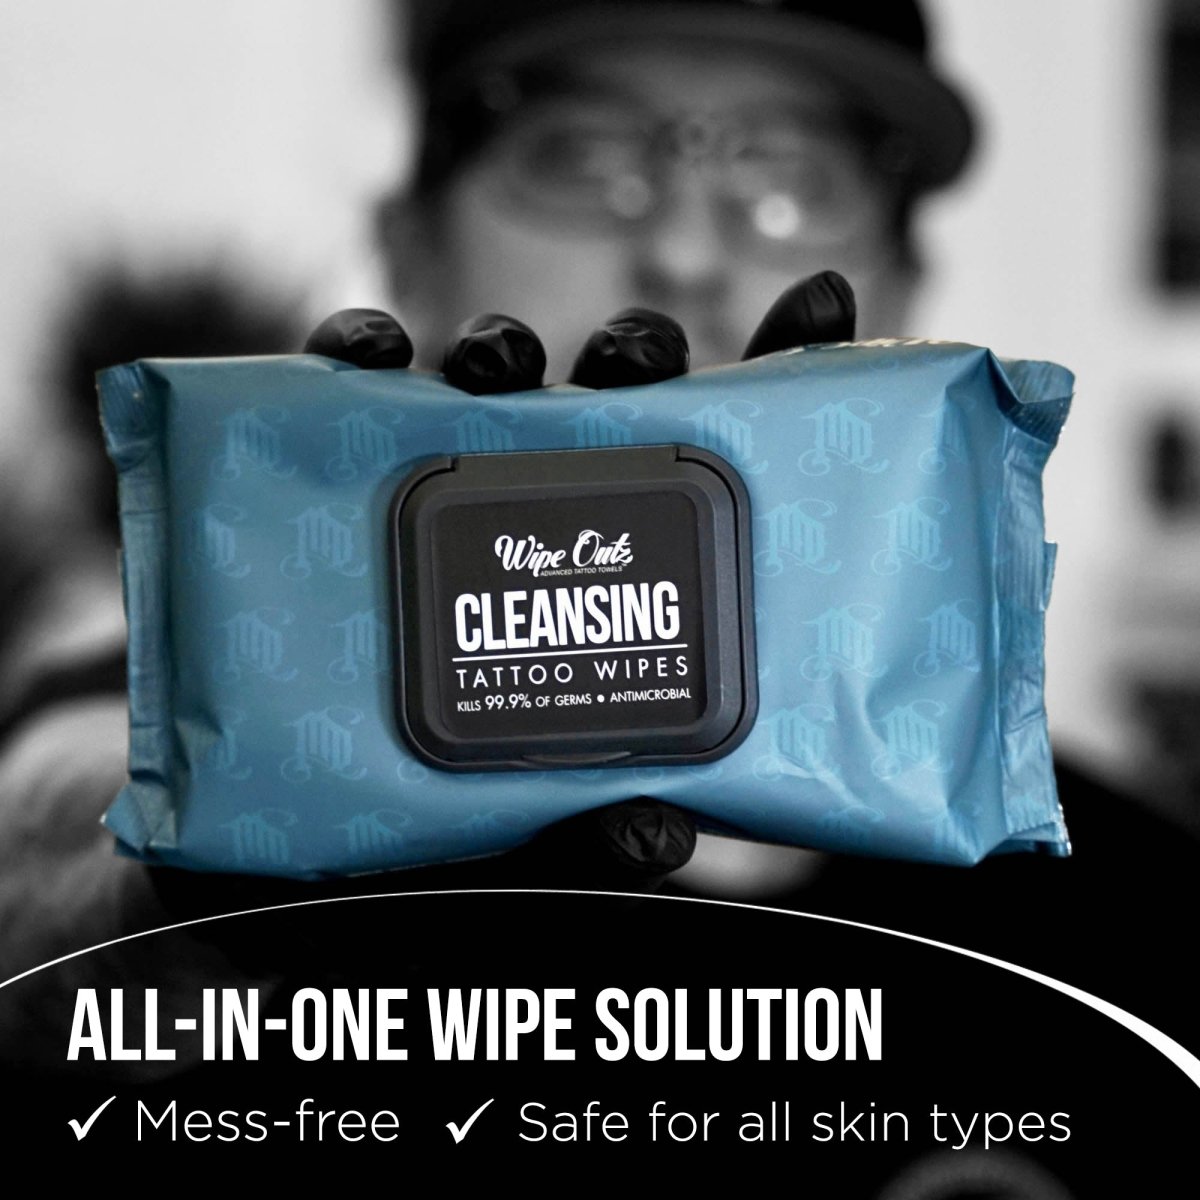 Cleansing Tattoo Wipes (40 Count) - MD Wipe Outz